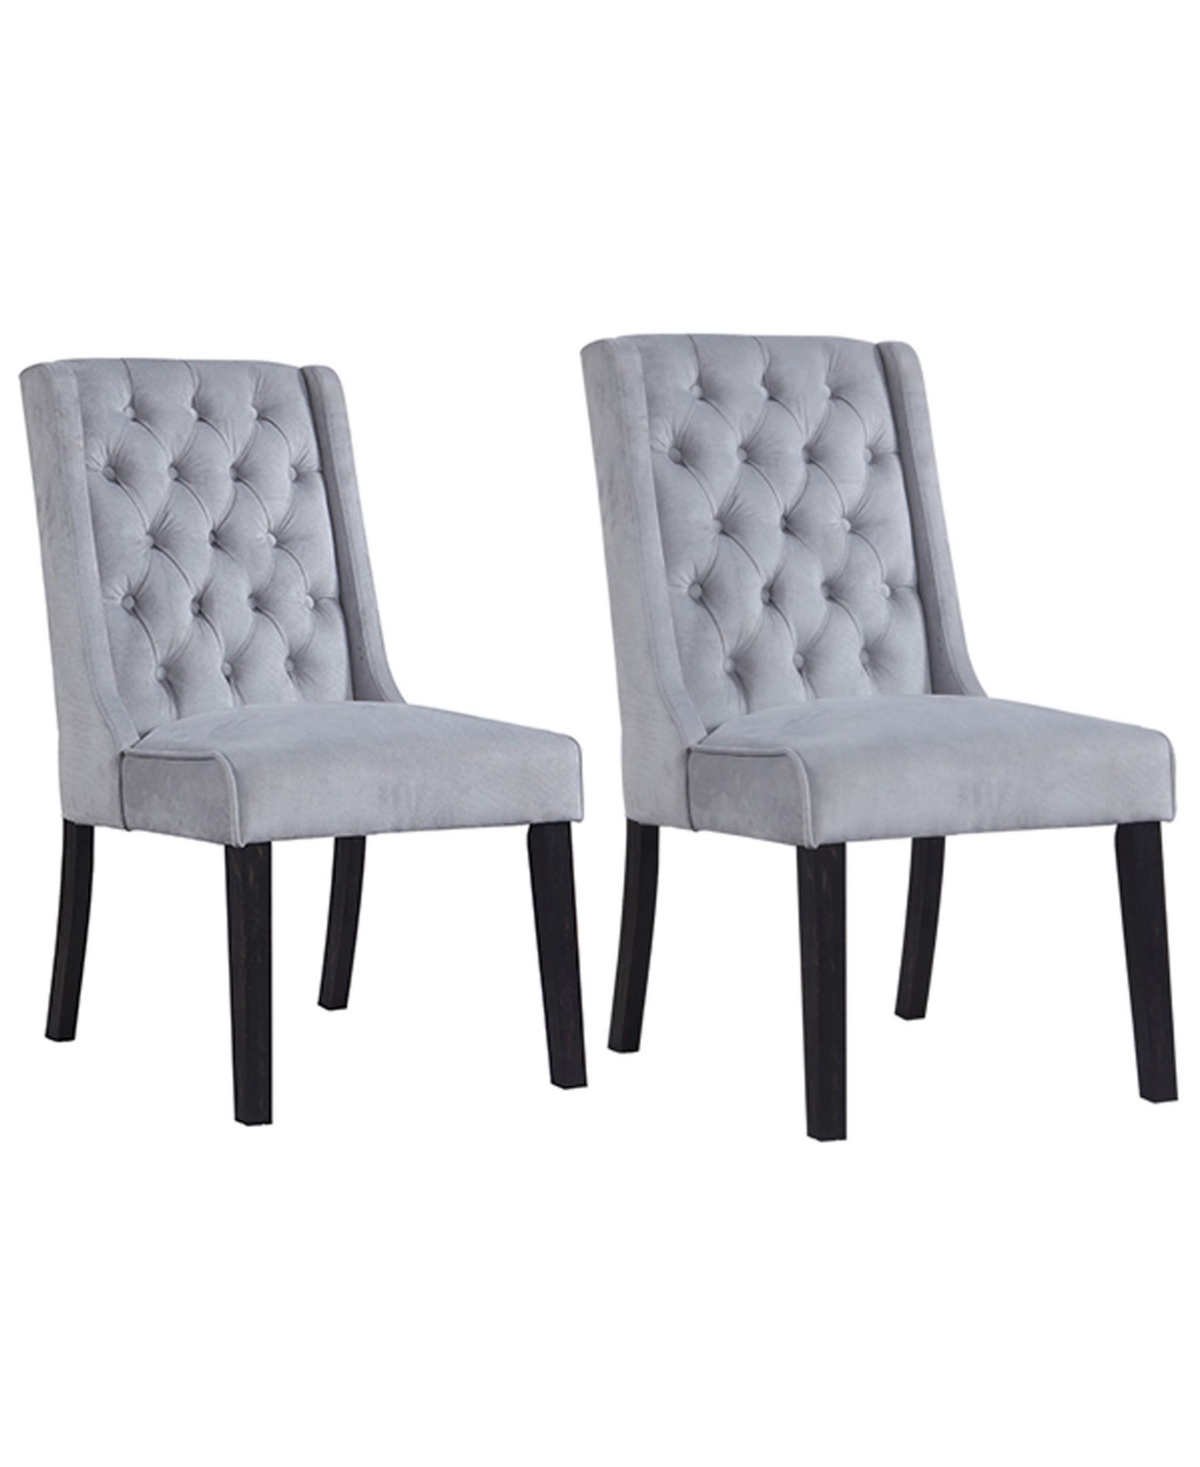 Best Master Furniture Newport Upholstered Side Chairs With Tufted Back, Set Of 2 In Gray